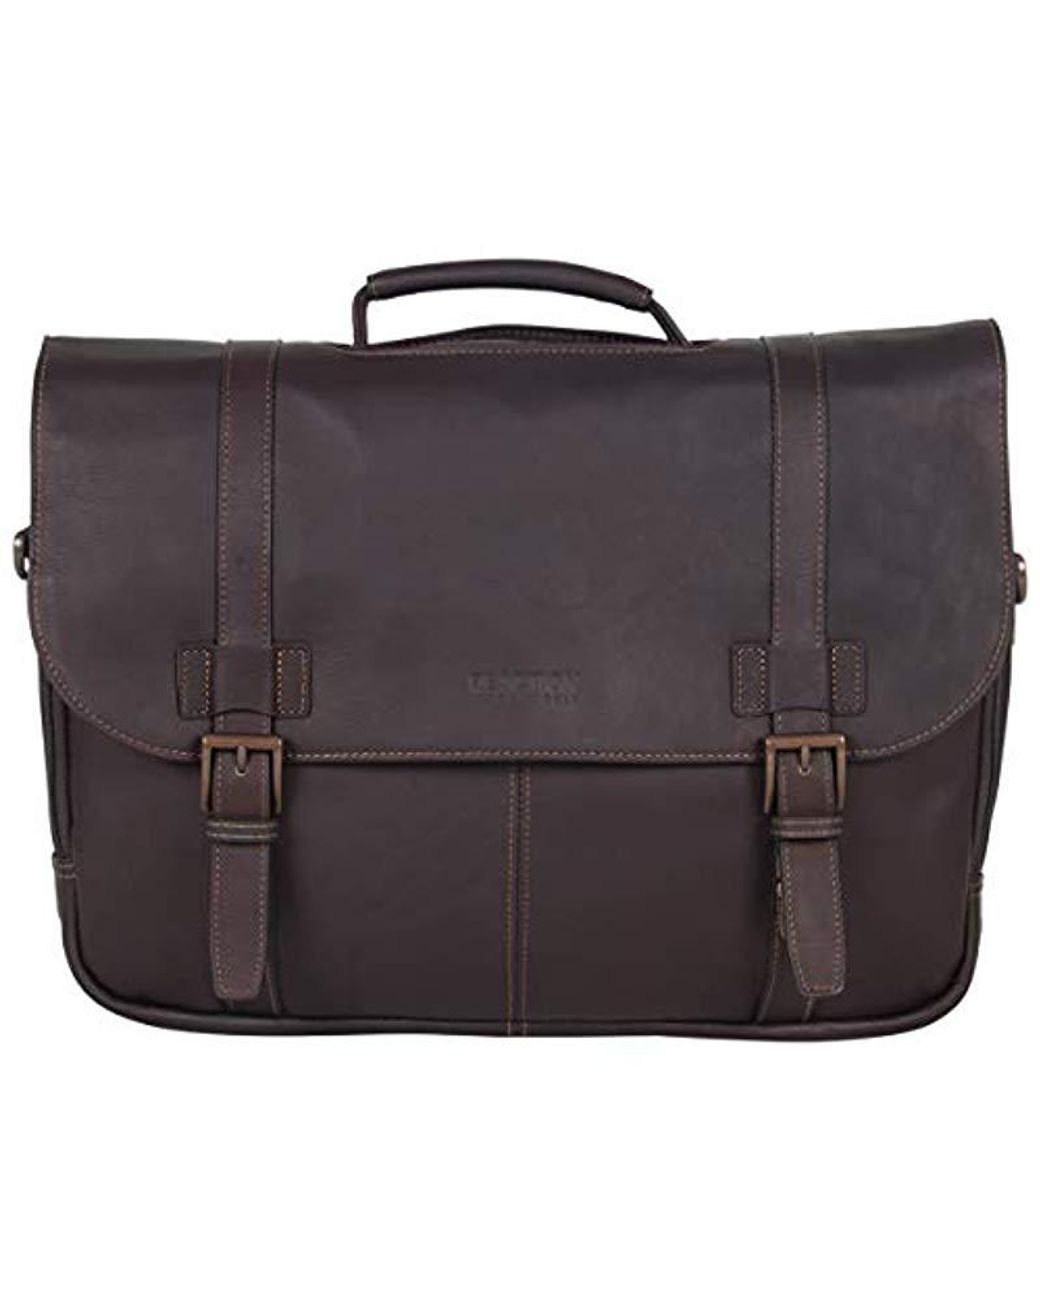 Kenneth Cole Reaction "Show Business" 4 Double Gusset Flapover Computer Case